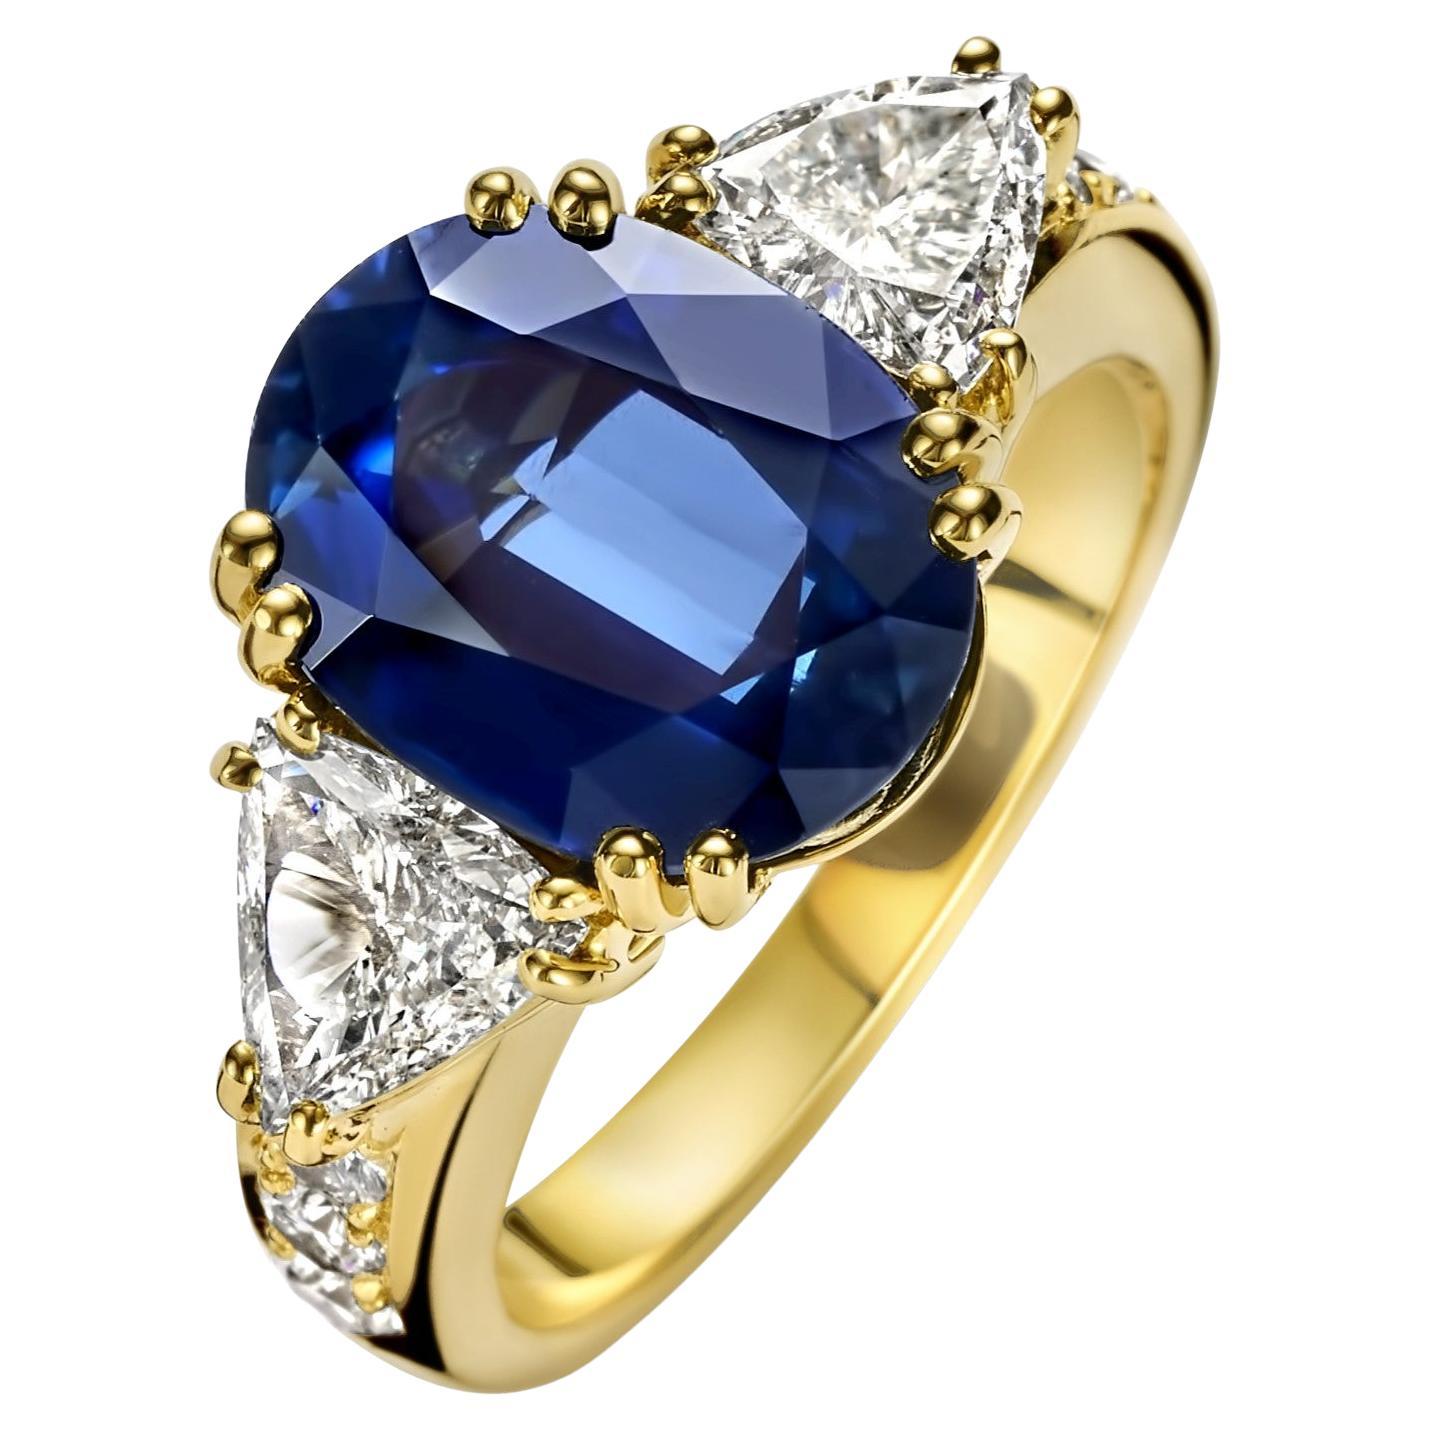 Magnificent 18kt Yellow Gold Ring With Beautiful 6.68ct Sapphire & 1.07 ct Large Triangle Diamonds +6 Round Brilliant Cut Diamonds 
Sapphire: Oval mixed cut natural sapphire, blue transparent, 6.68ct Comes with IGI certificate

Diamonds: Triangle